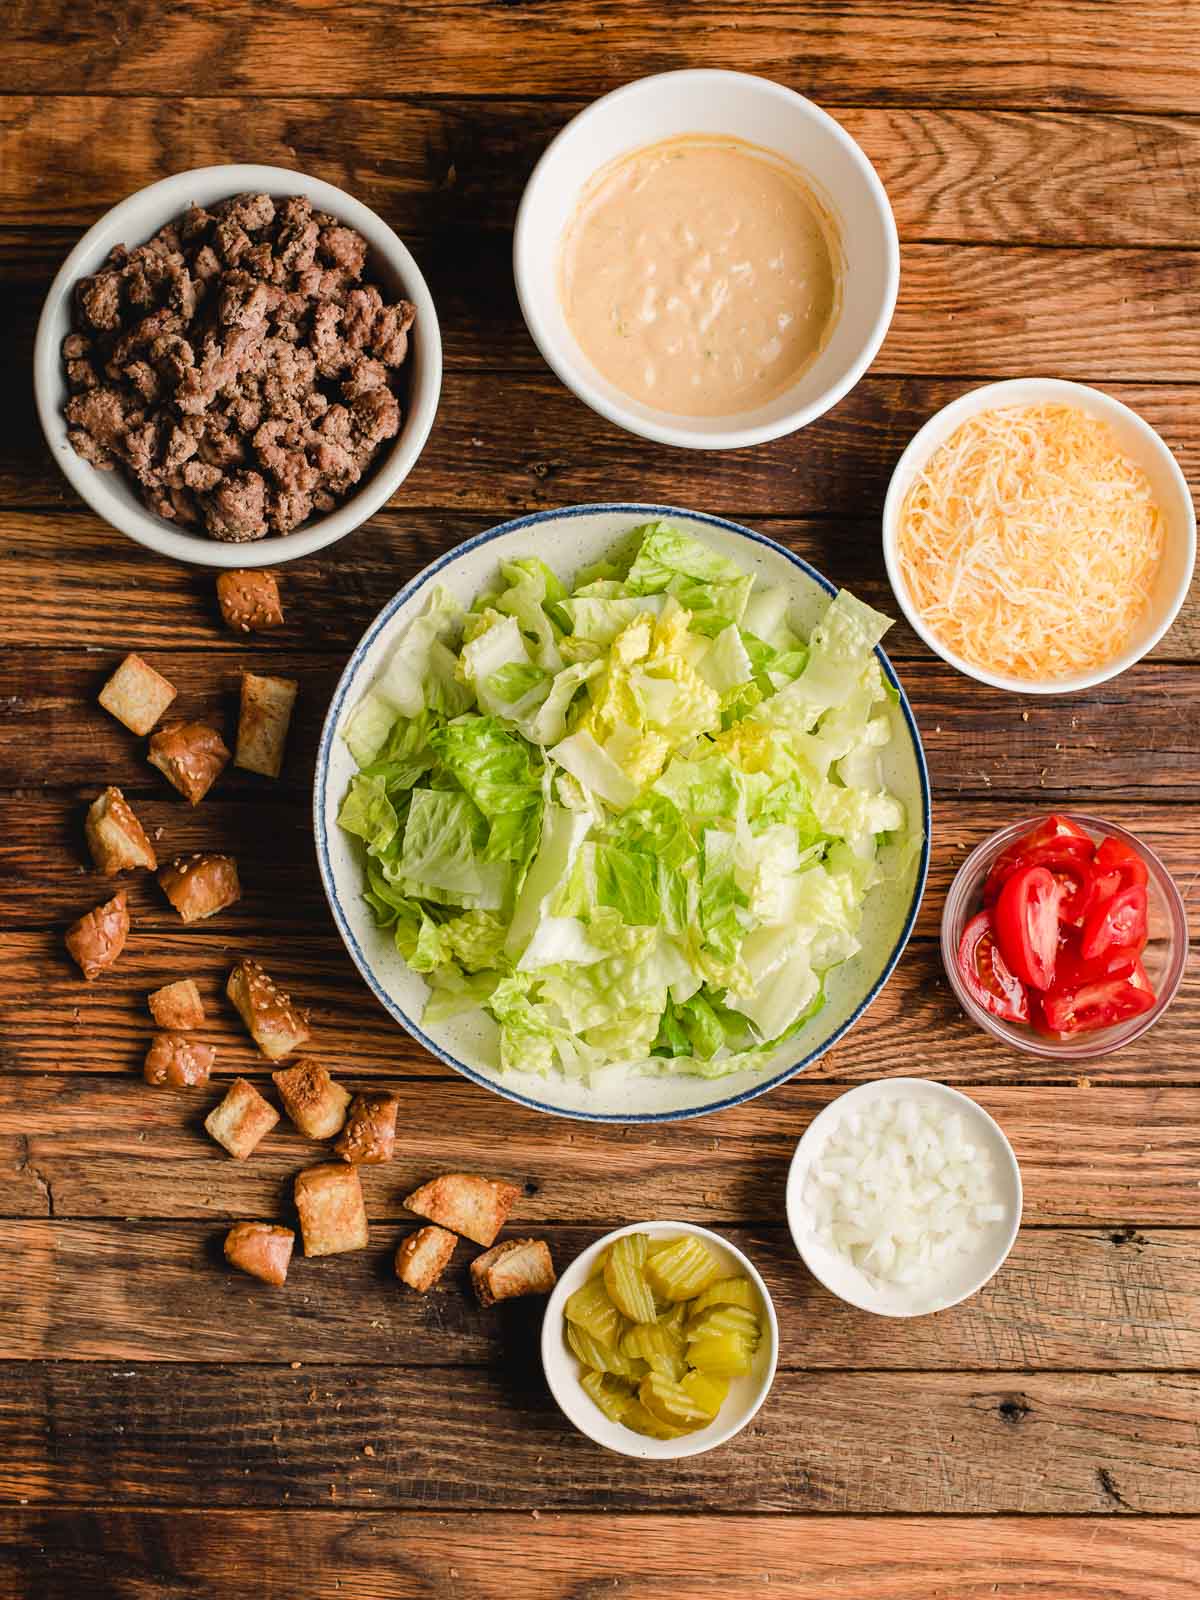 Ingredients laid out on a table to make Big Mac Salad.